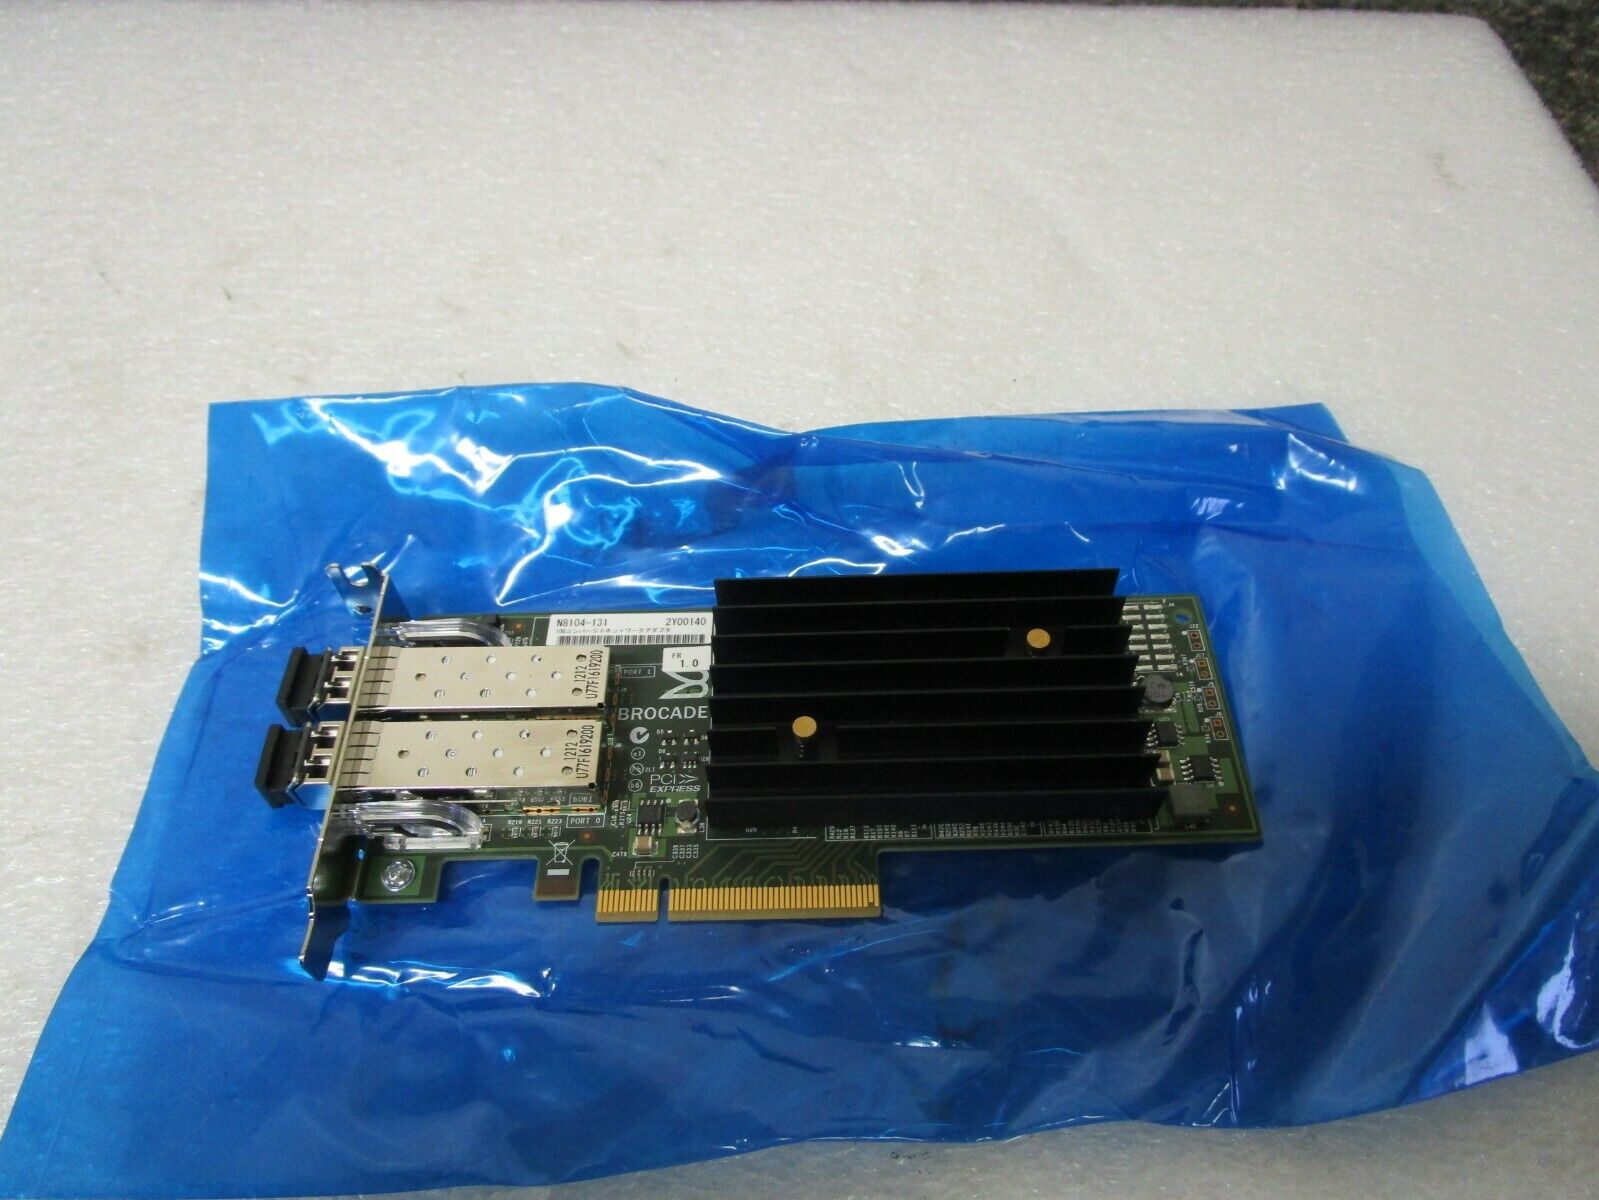 NEC N8104-131 BROCADE 1020 Dual Port 10Gbps Converged Network Adapter 